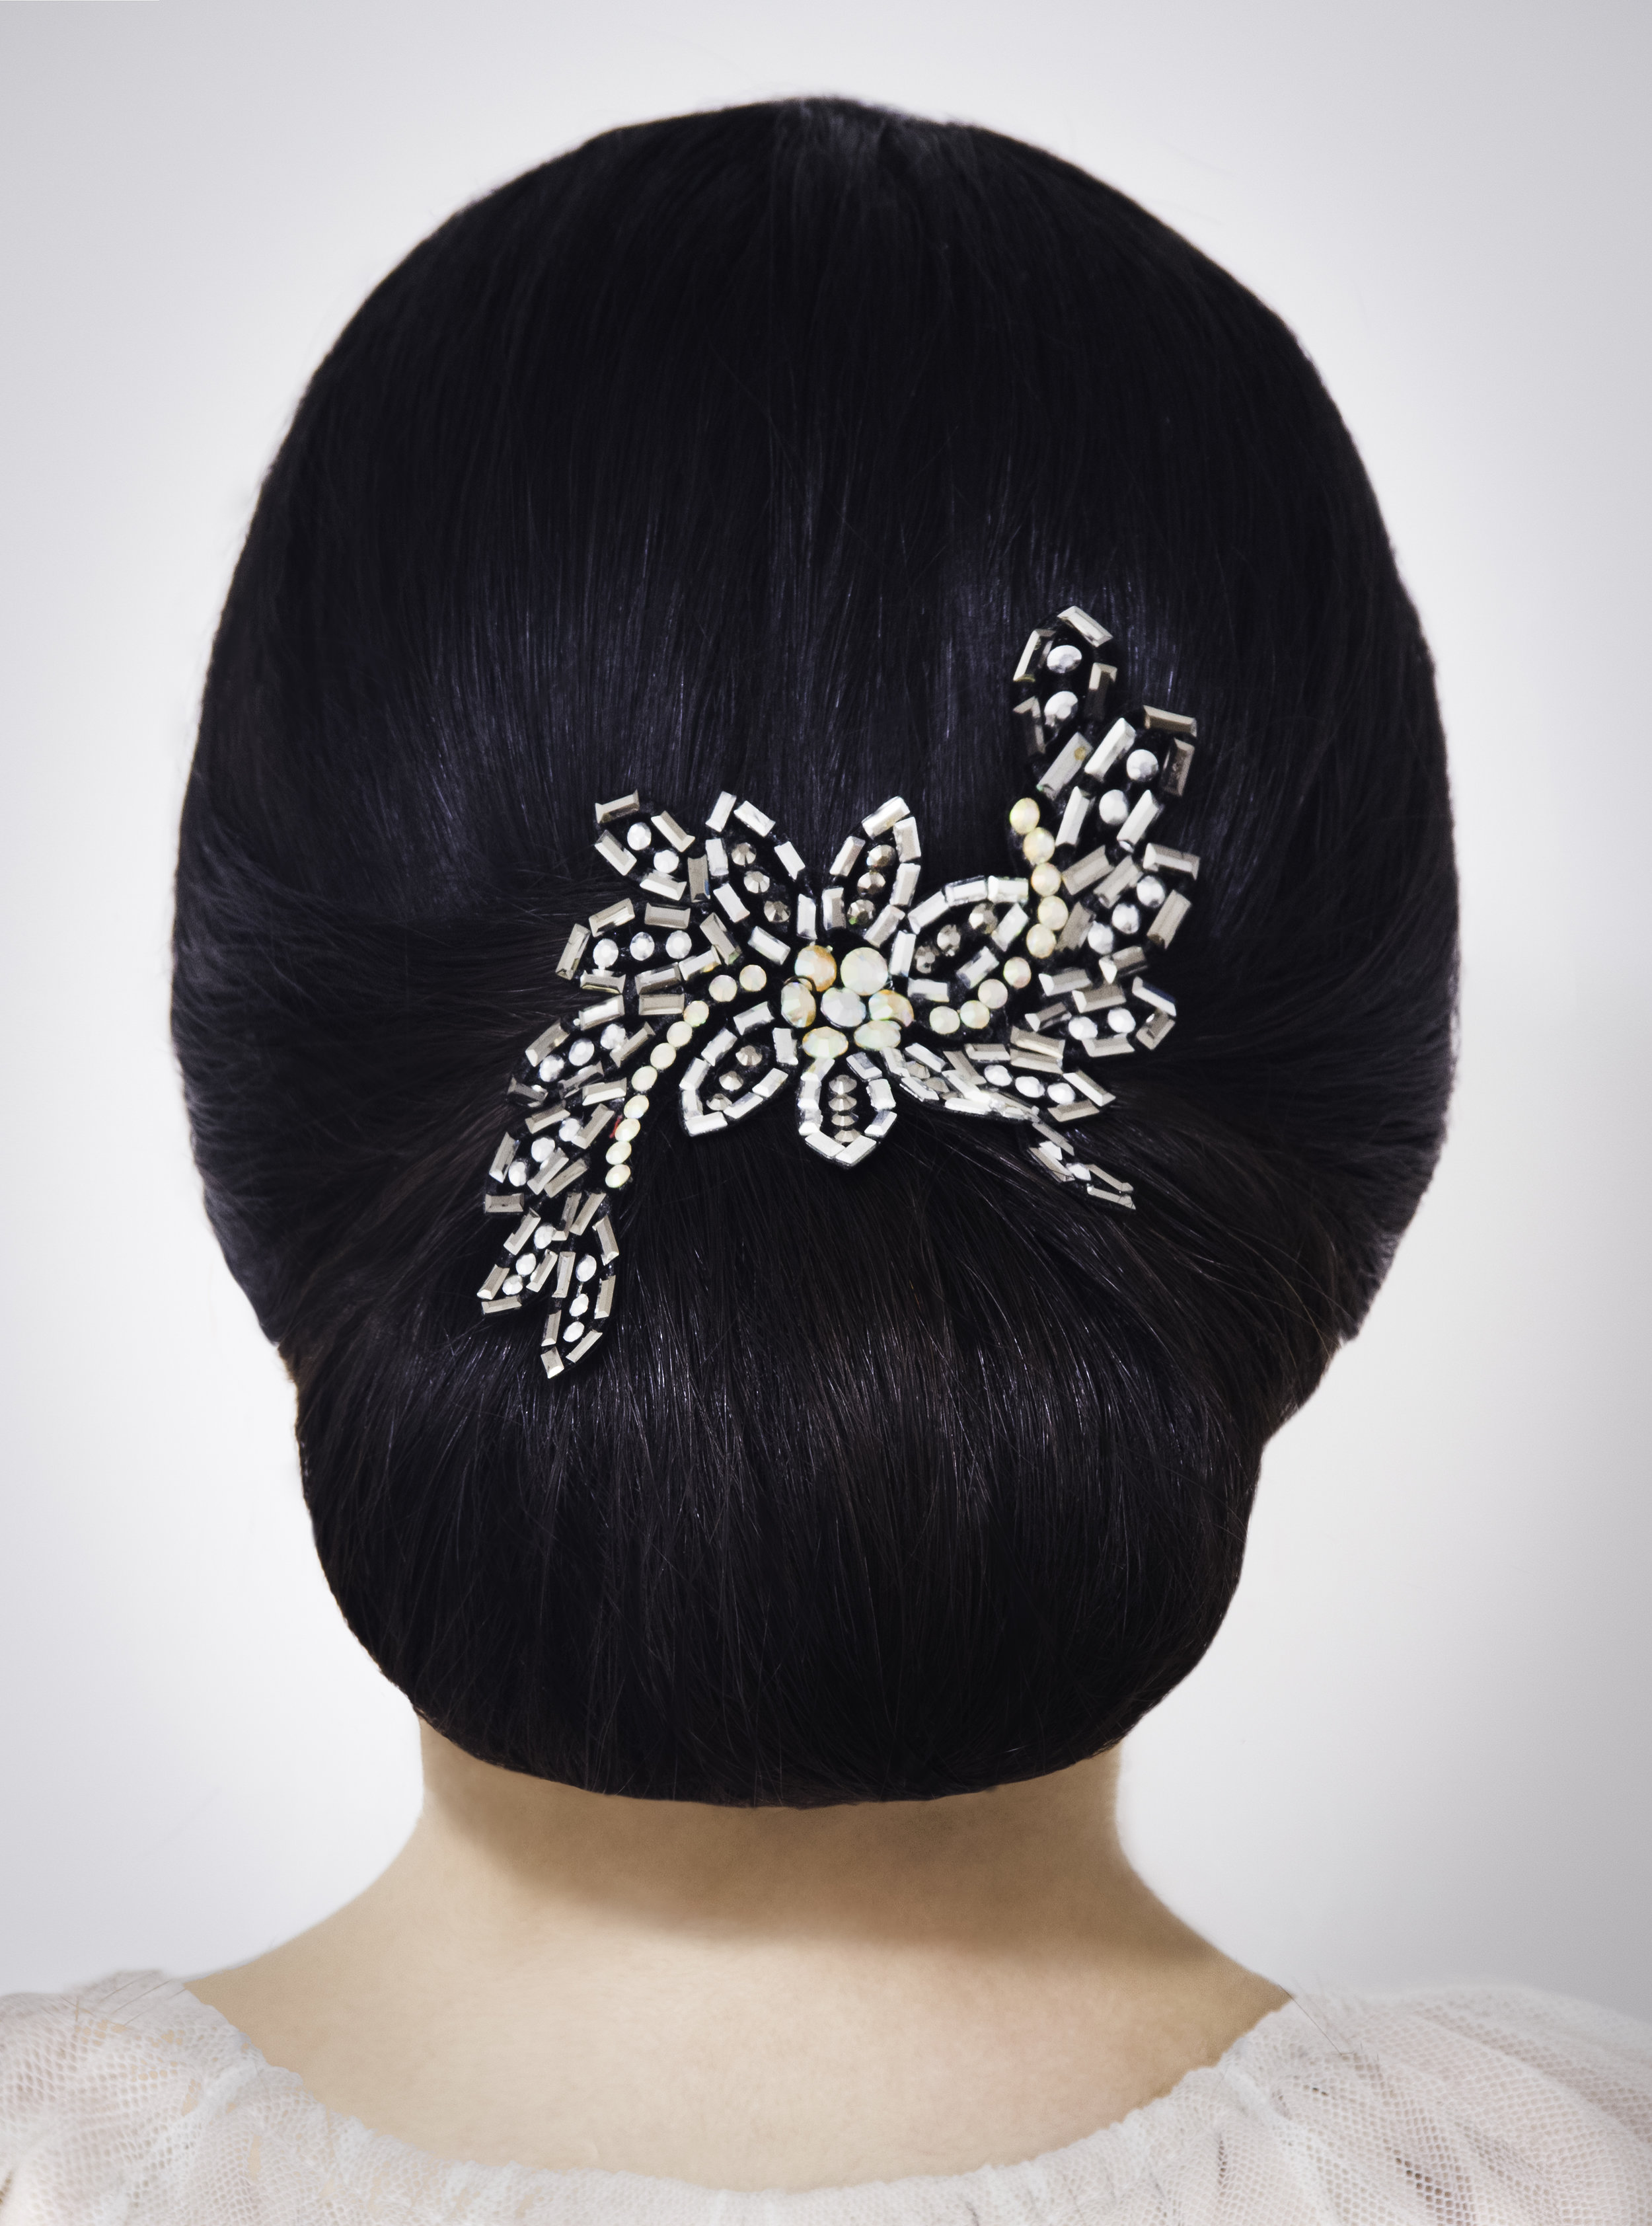 bridal hair #3 basic chignon with hairpiece above